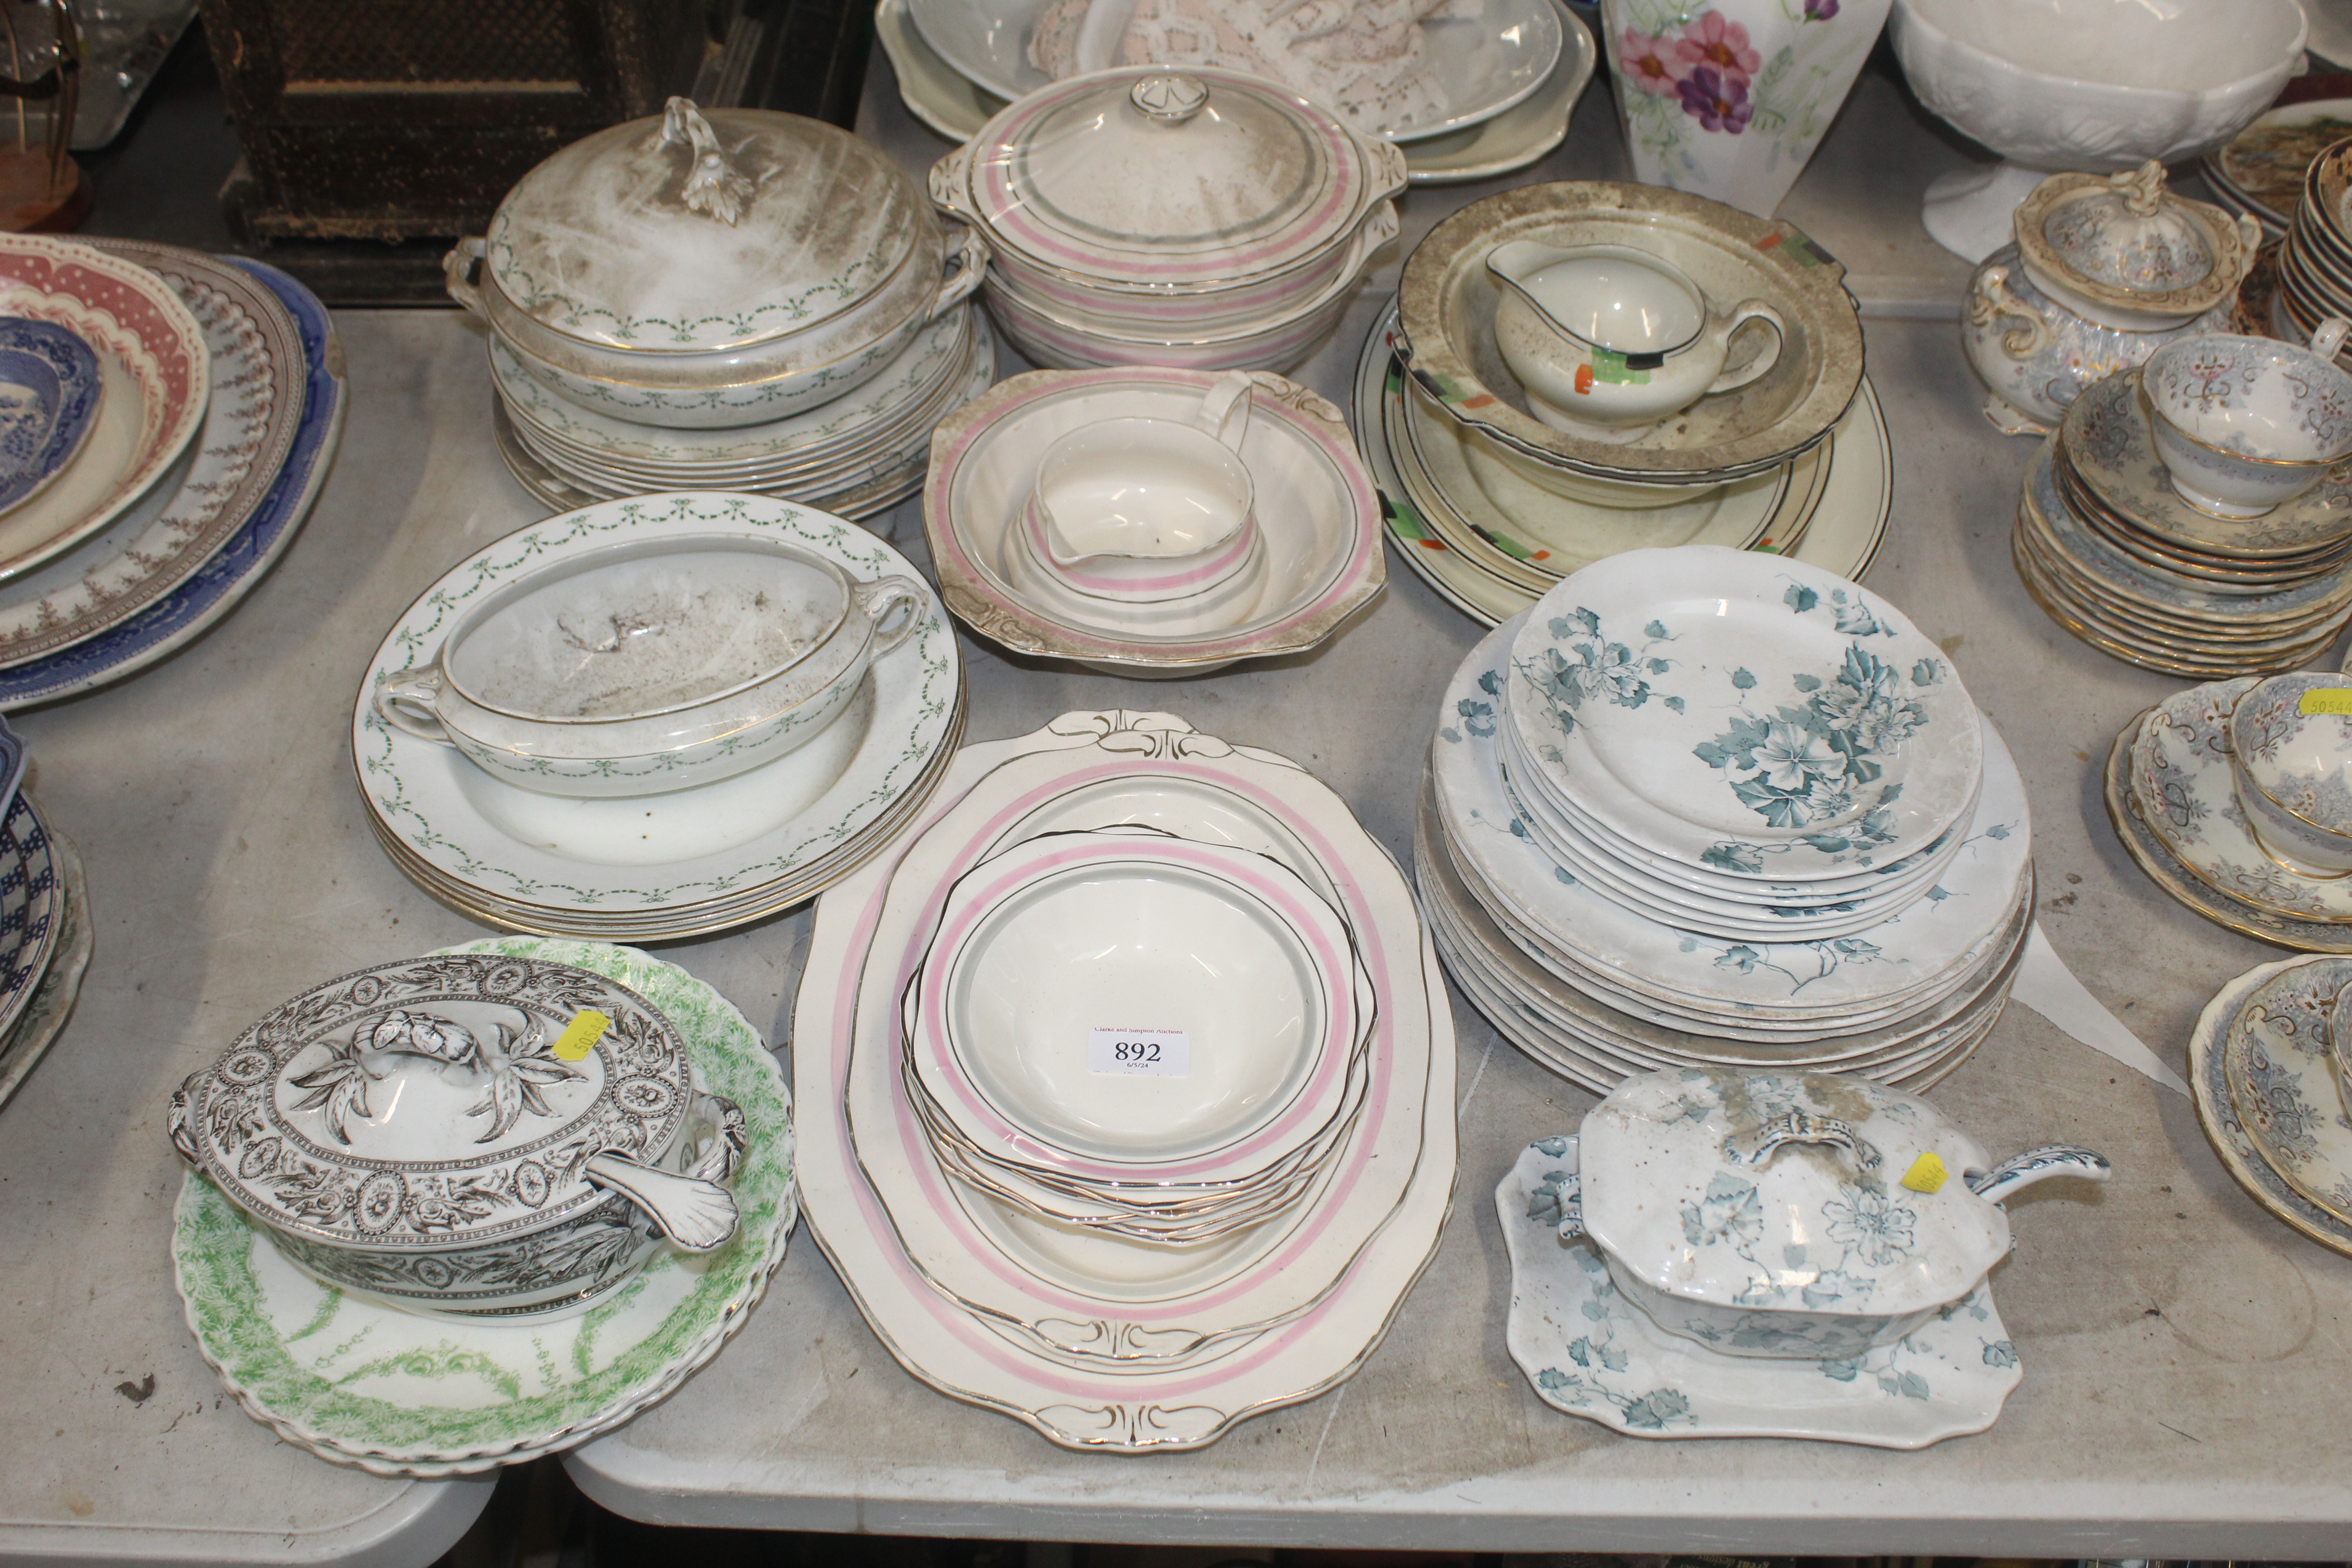 A collection of various patterned dinner ware